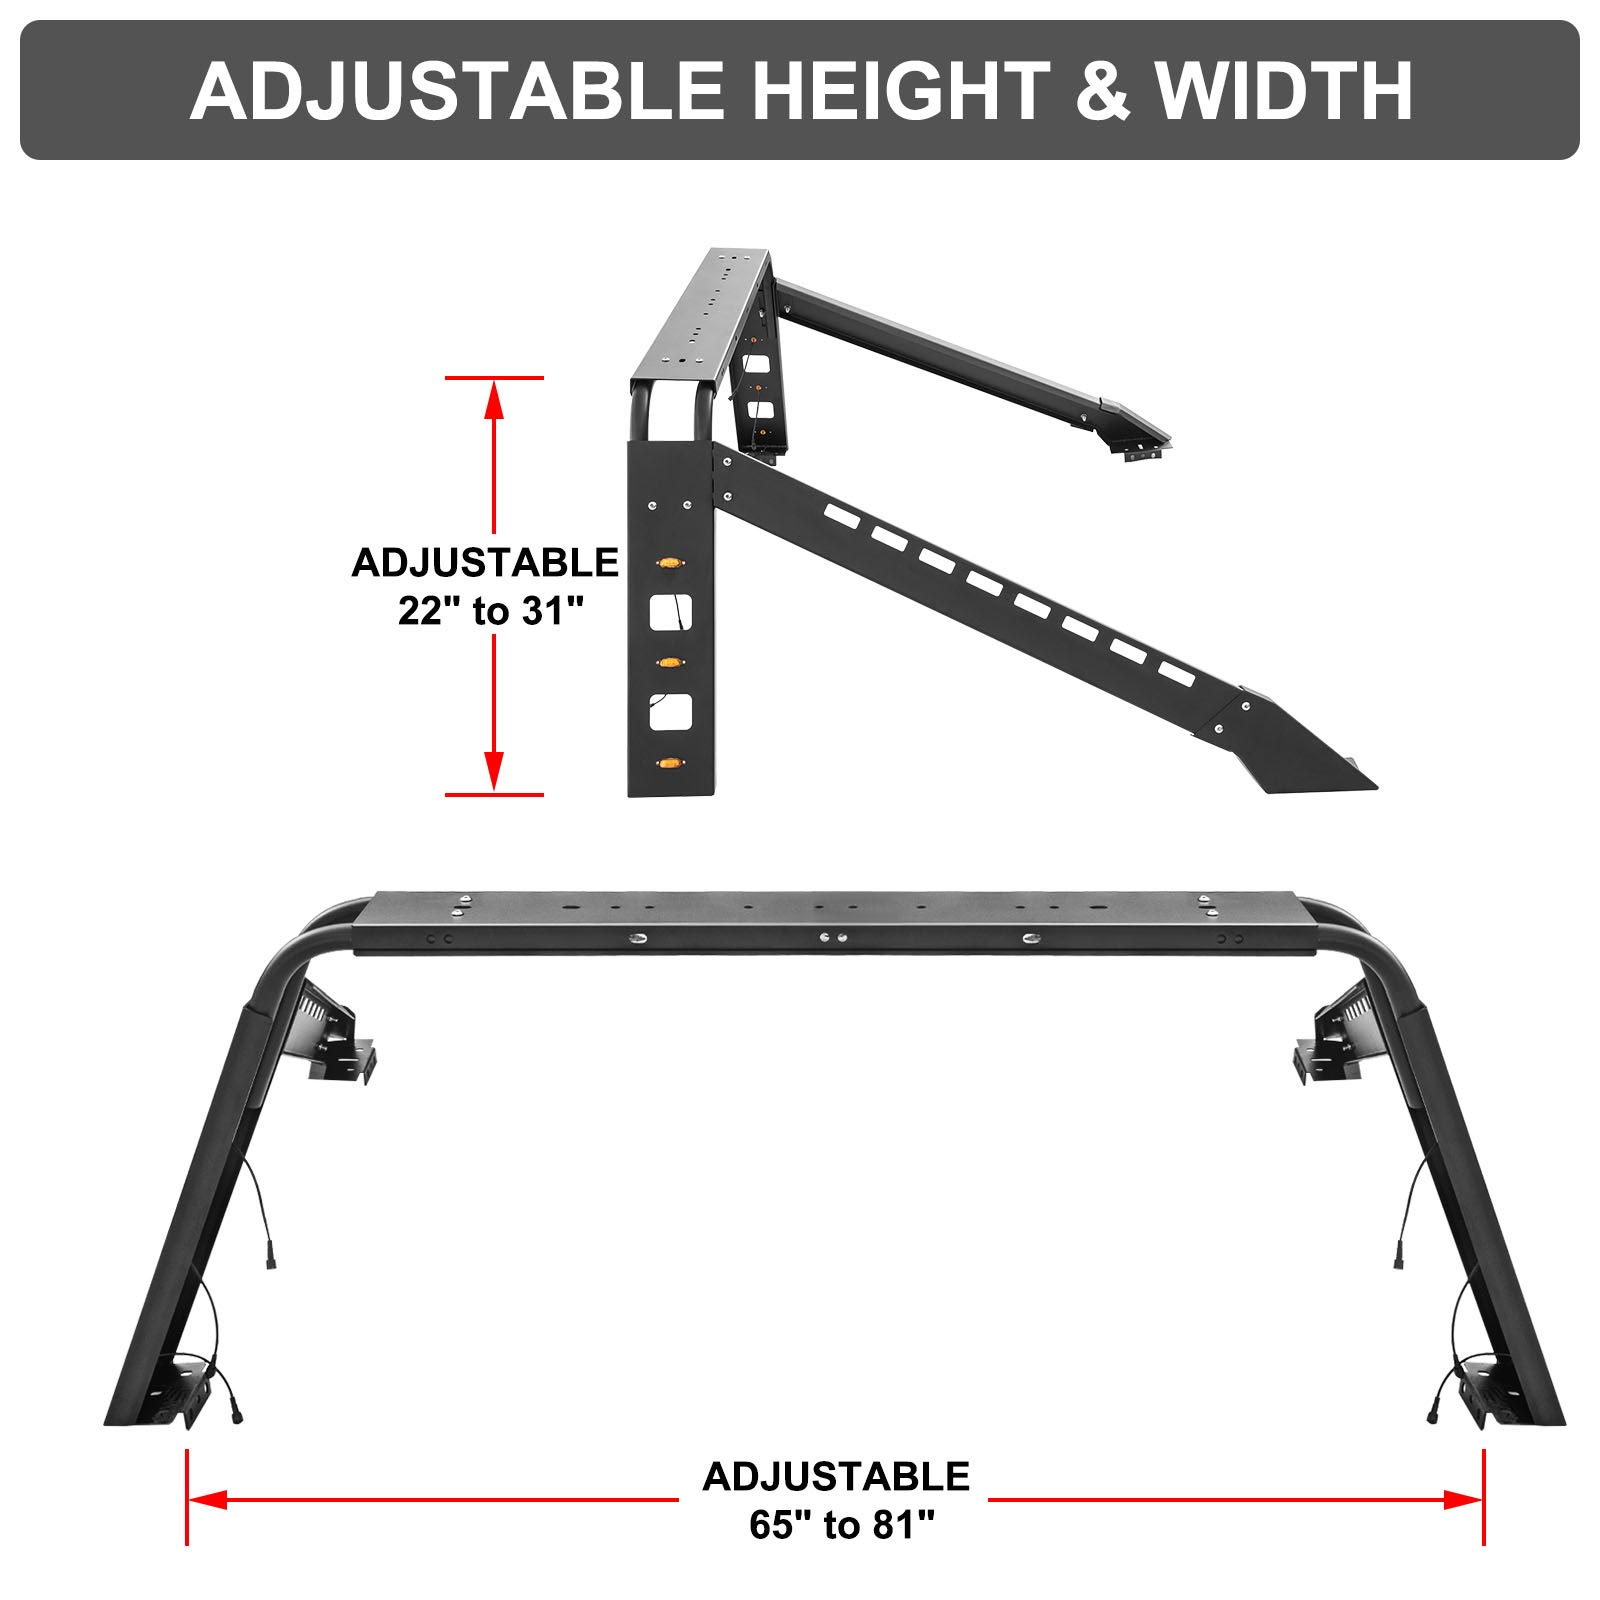 65 to 81 VEVOR Sport Bar Roll Bar Rack Premium Truck Accessories with Adjustable Height & Adjustable Width 22 to 31 Iron Plate Roll Bar Fits for Full Size Trucks/Silverado/Ram/F-150